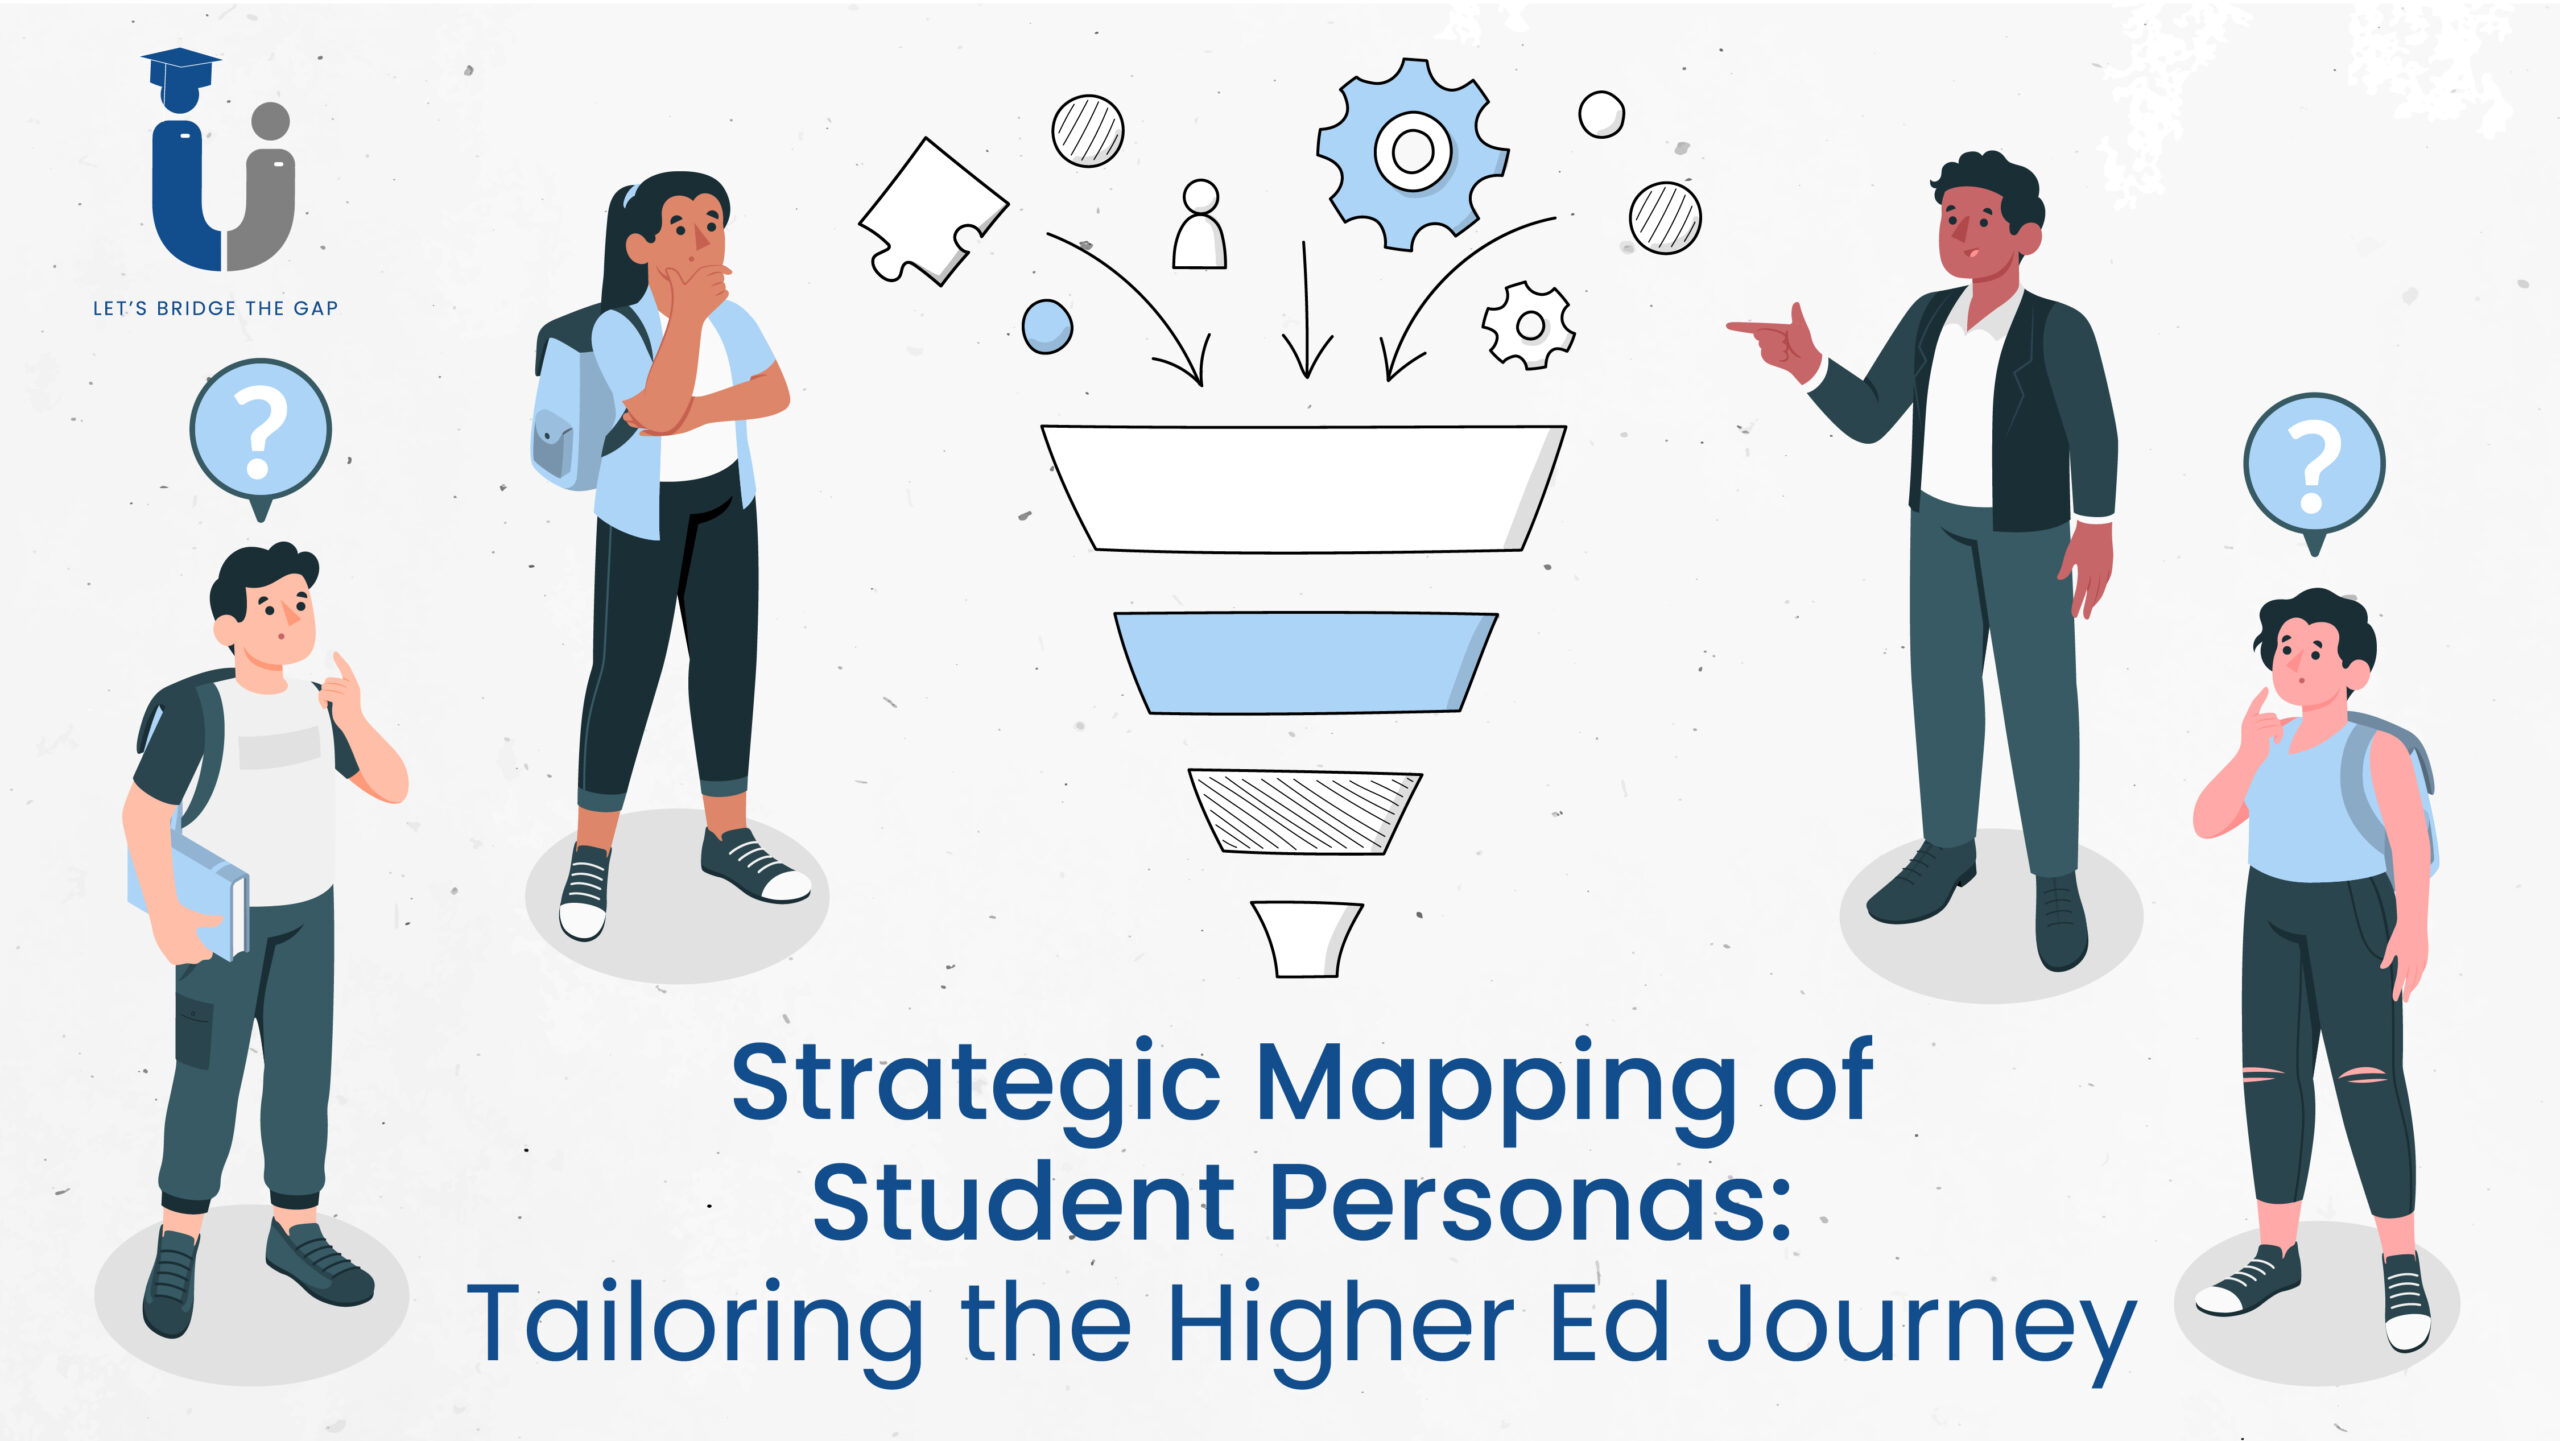 Strategic Mapping of Student Personas: Tailoring the Higher Ed Journey